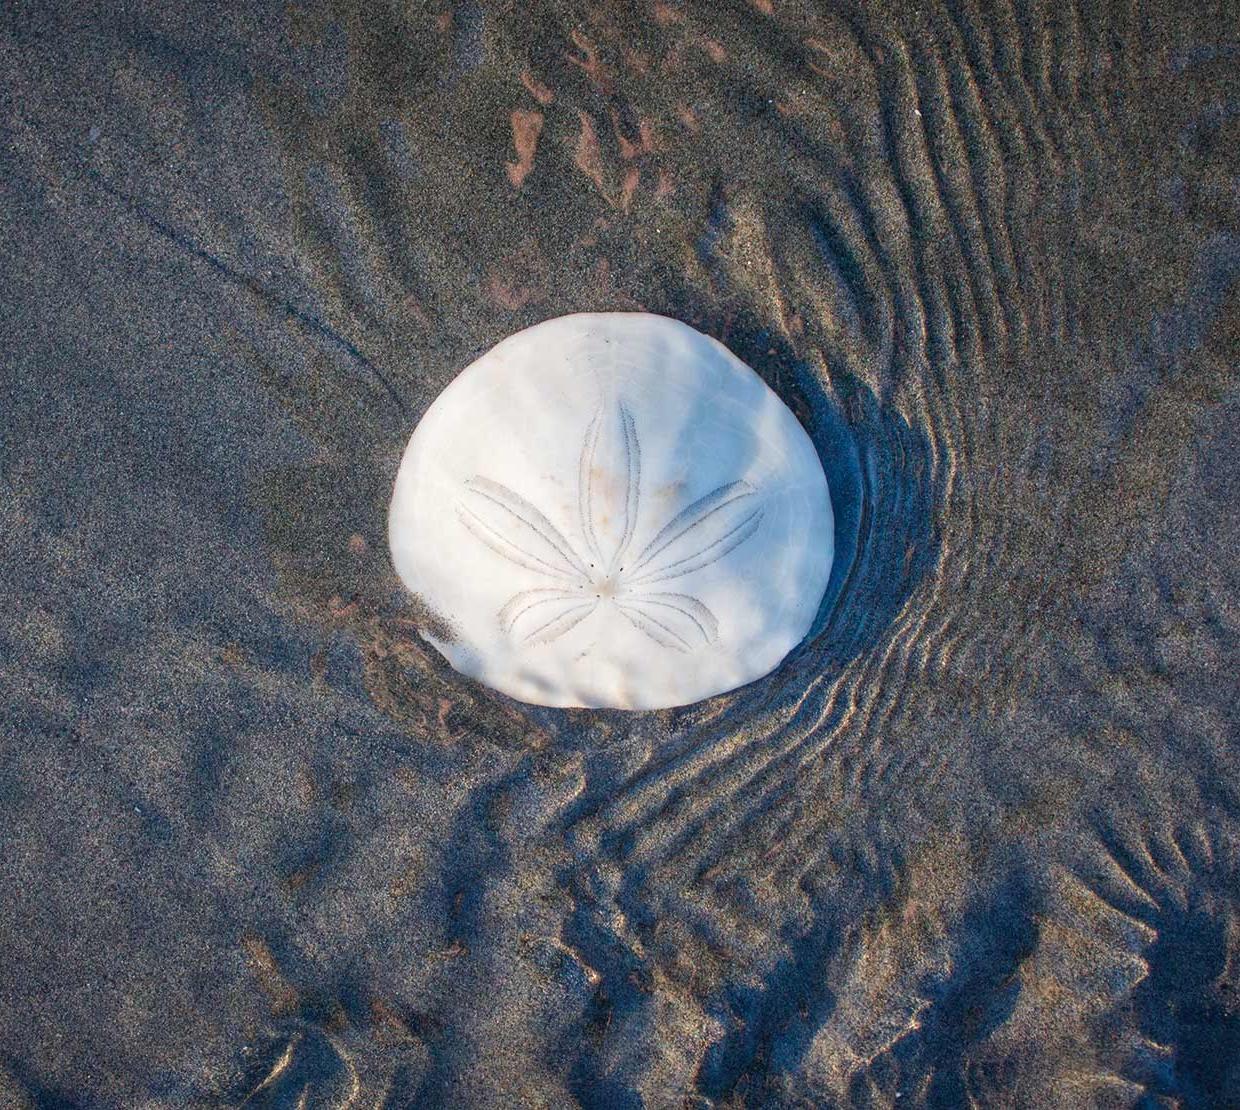 Sea shell washed up on ocean shore